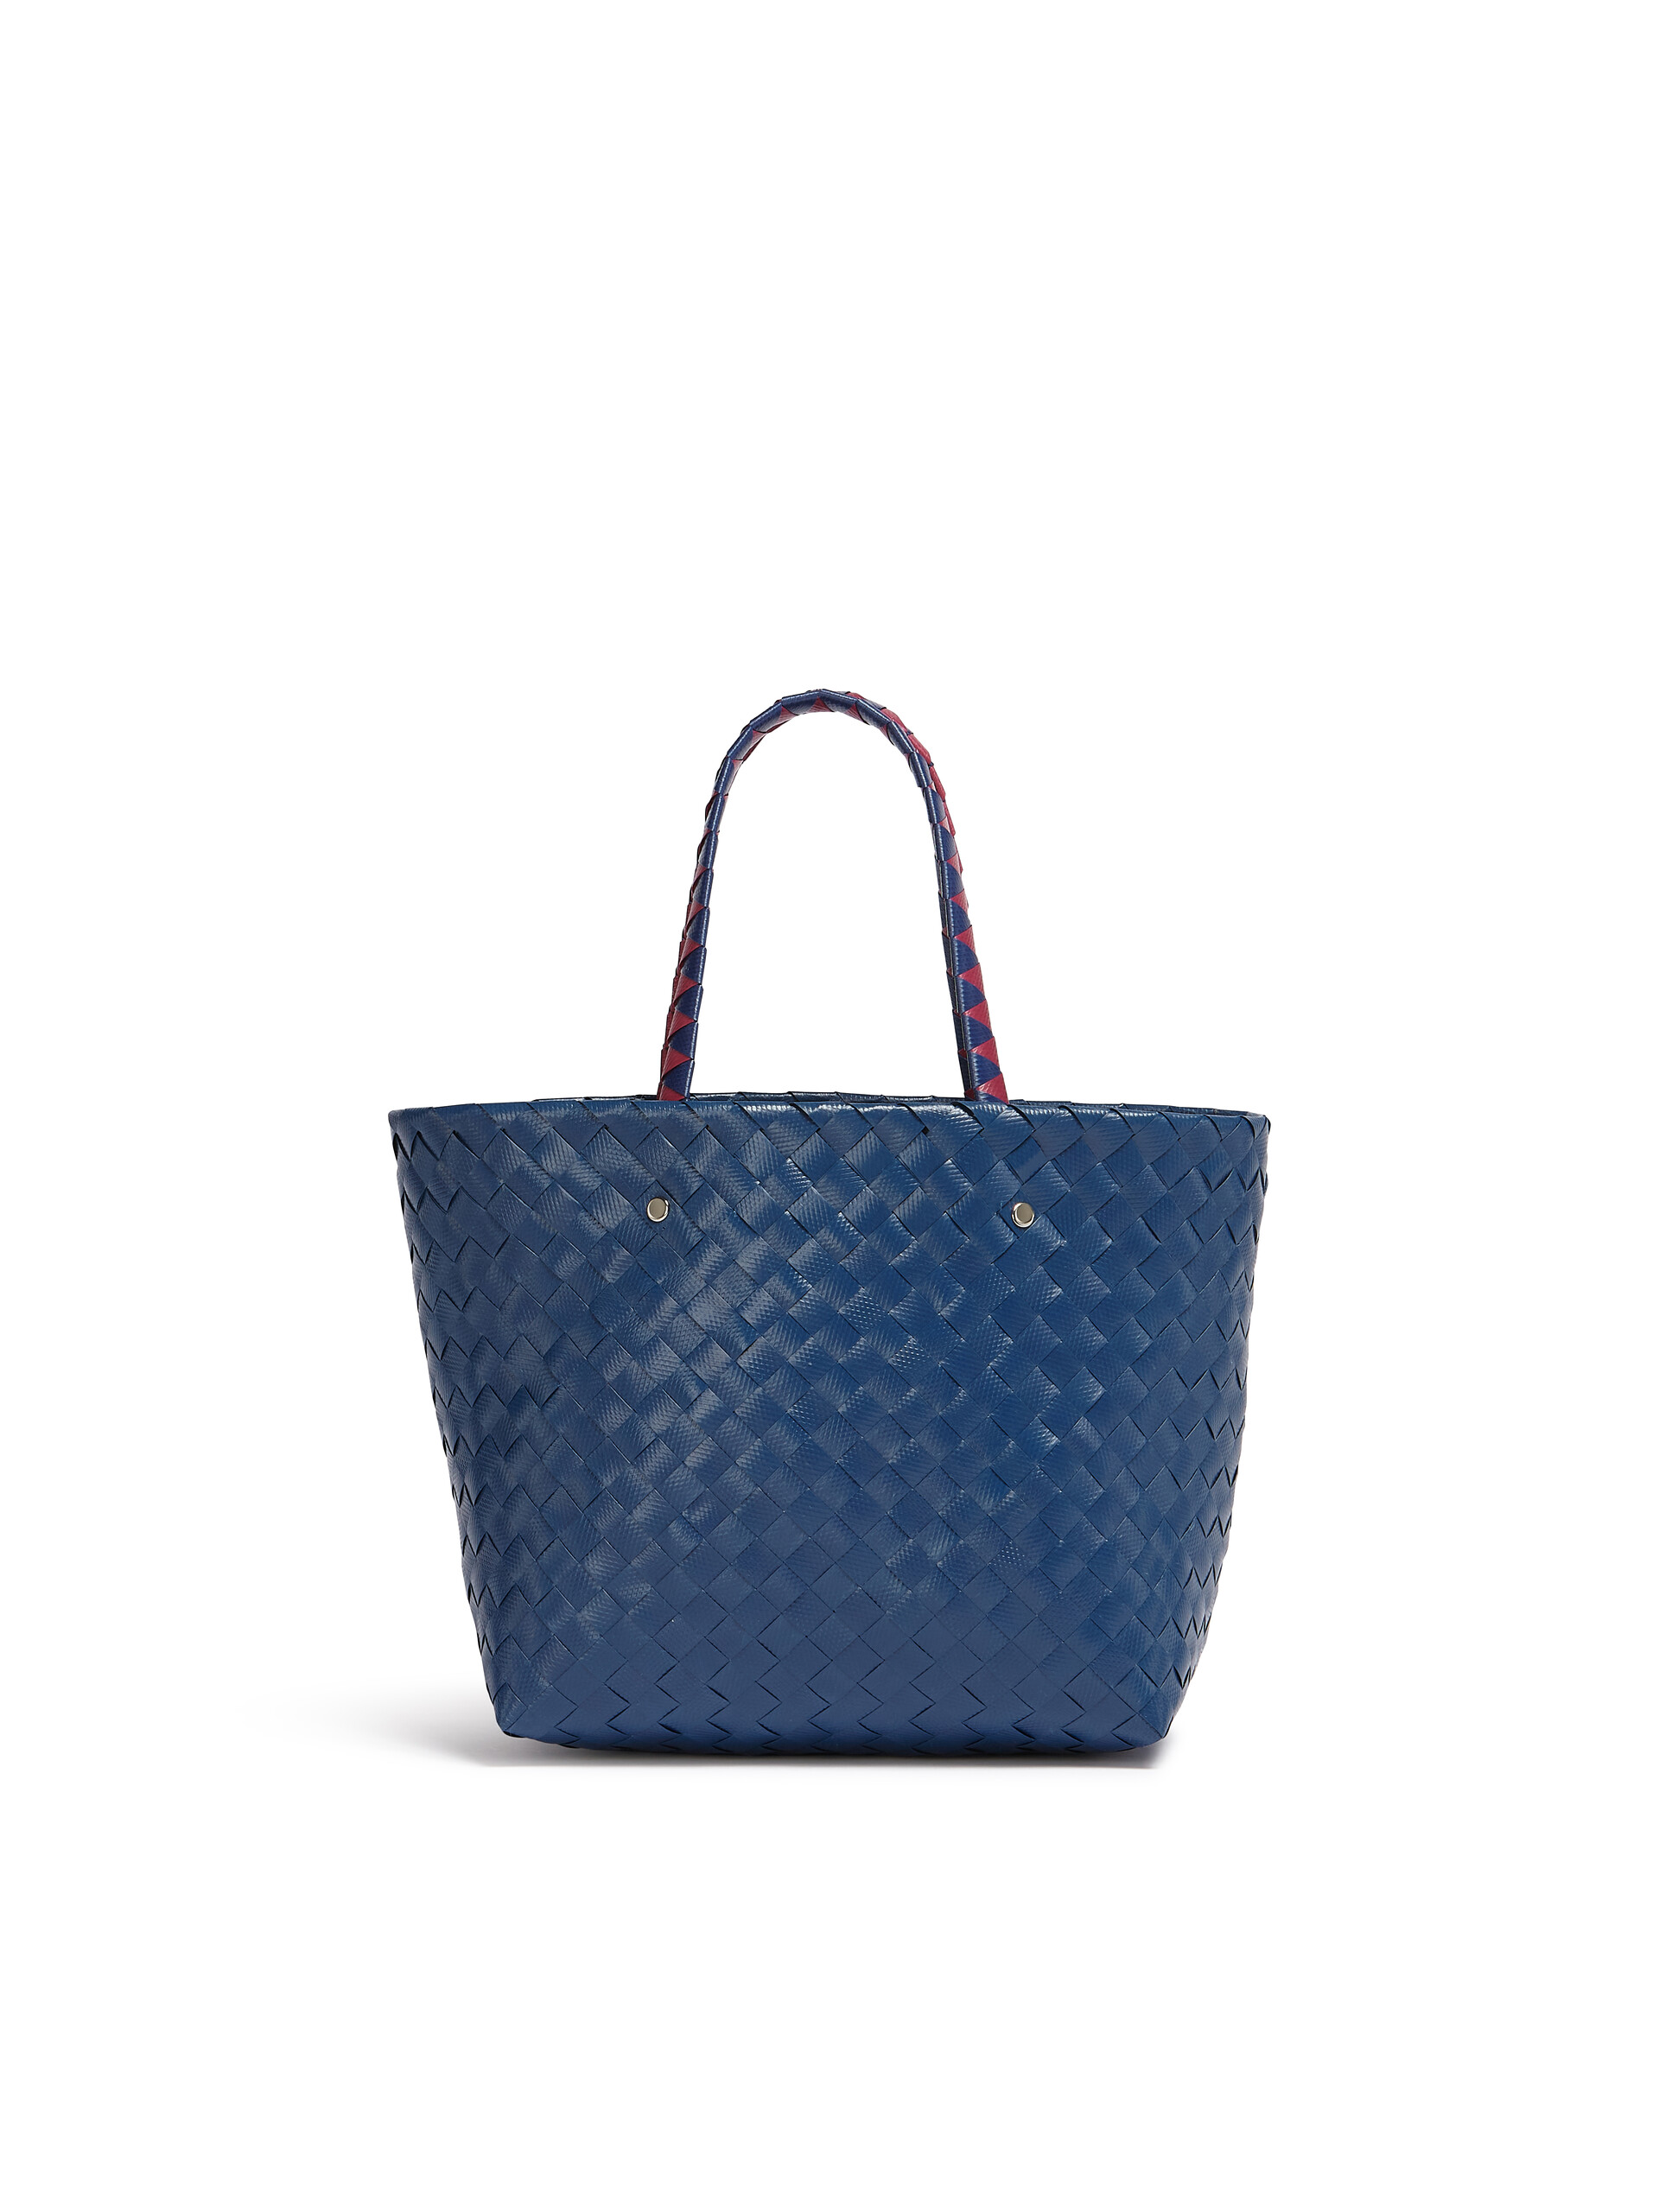 MARNI MARKET small bag in blue flower motif - Bags - Image 3